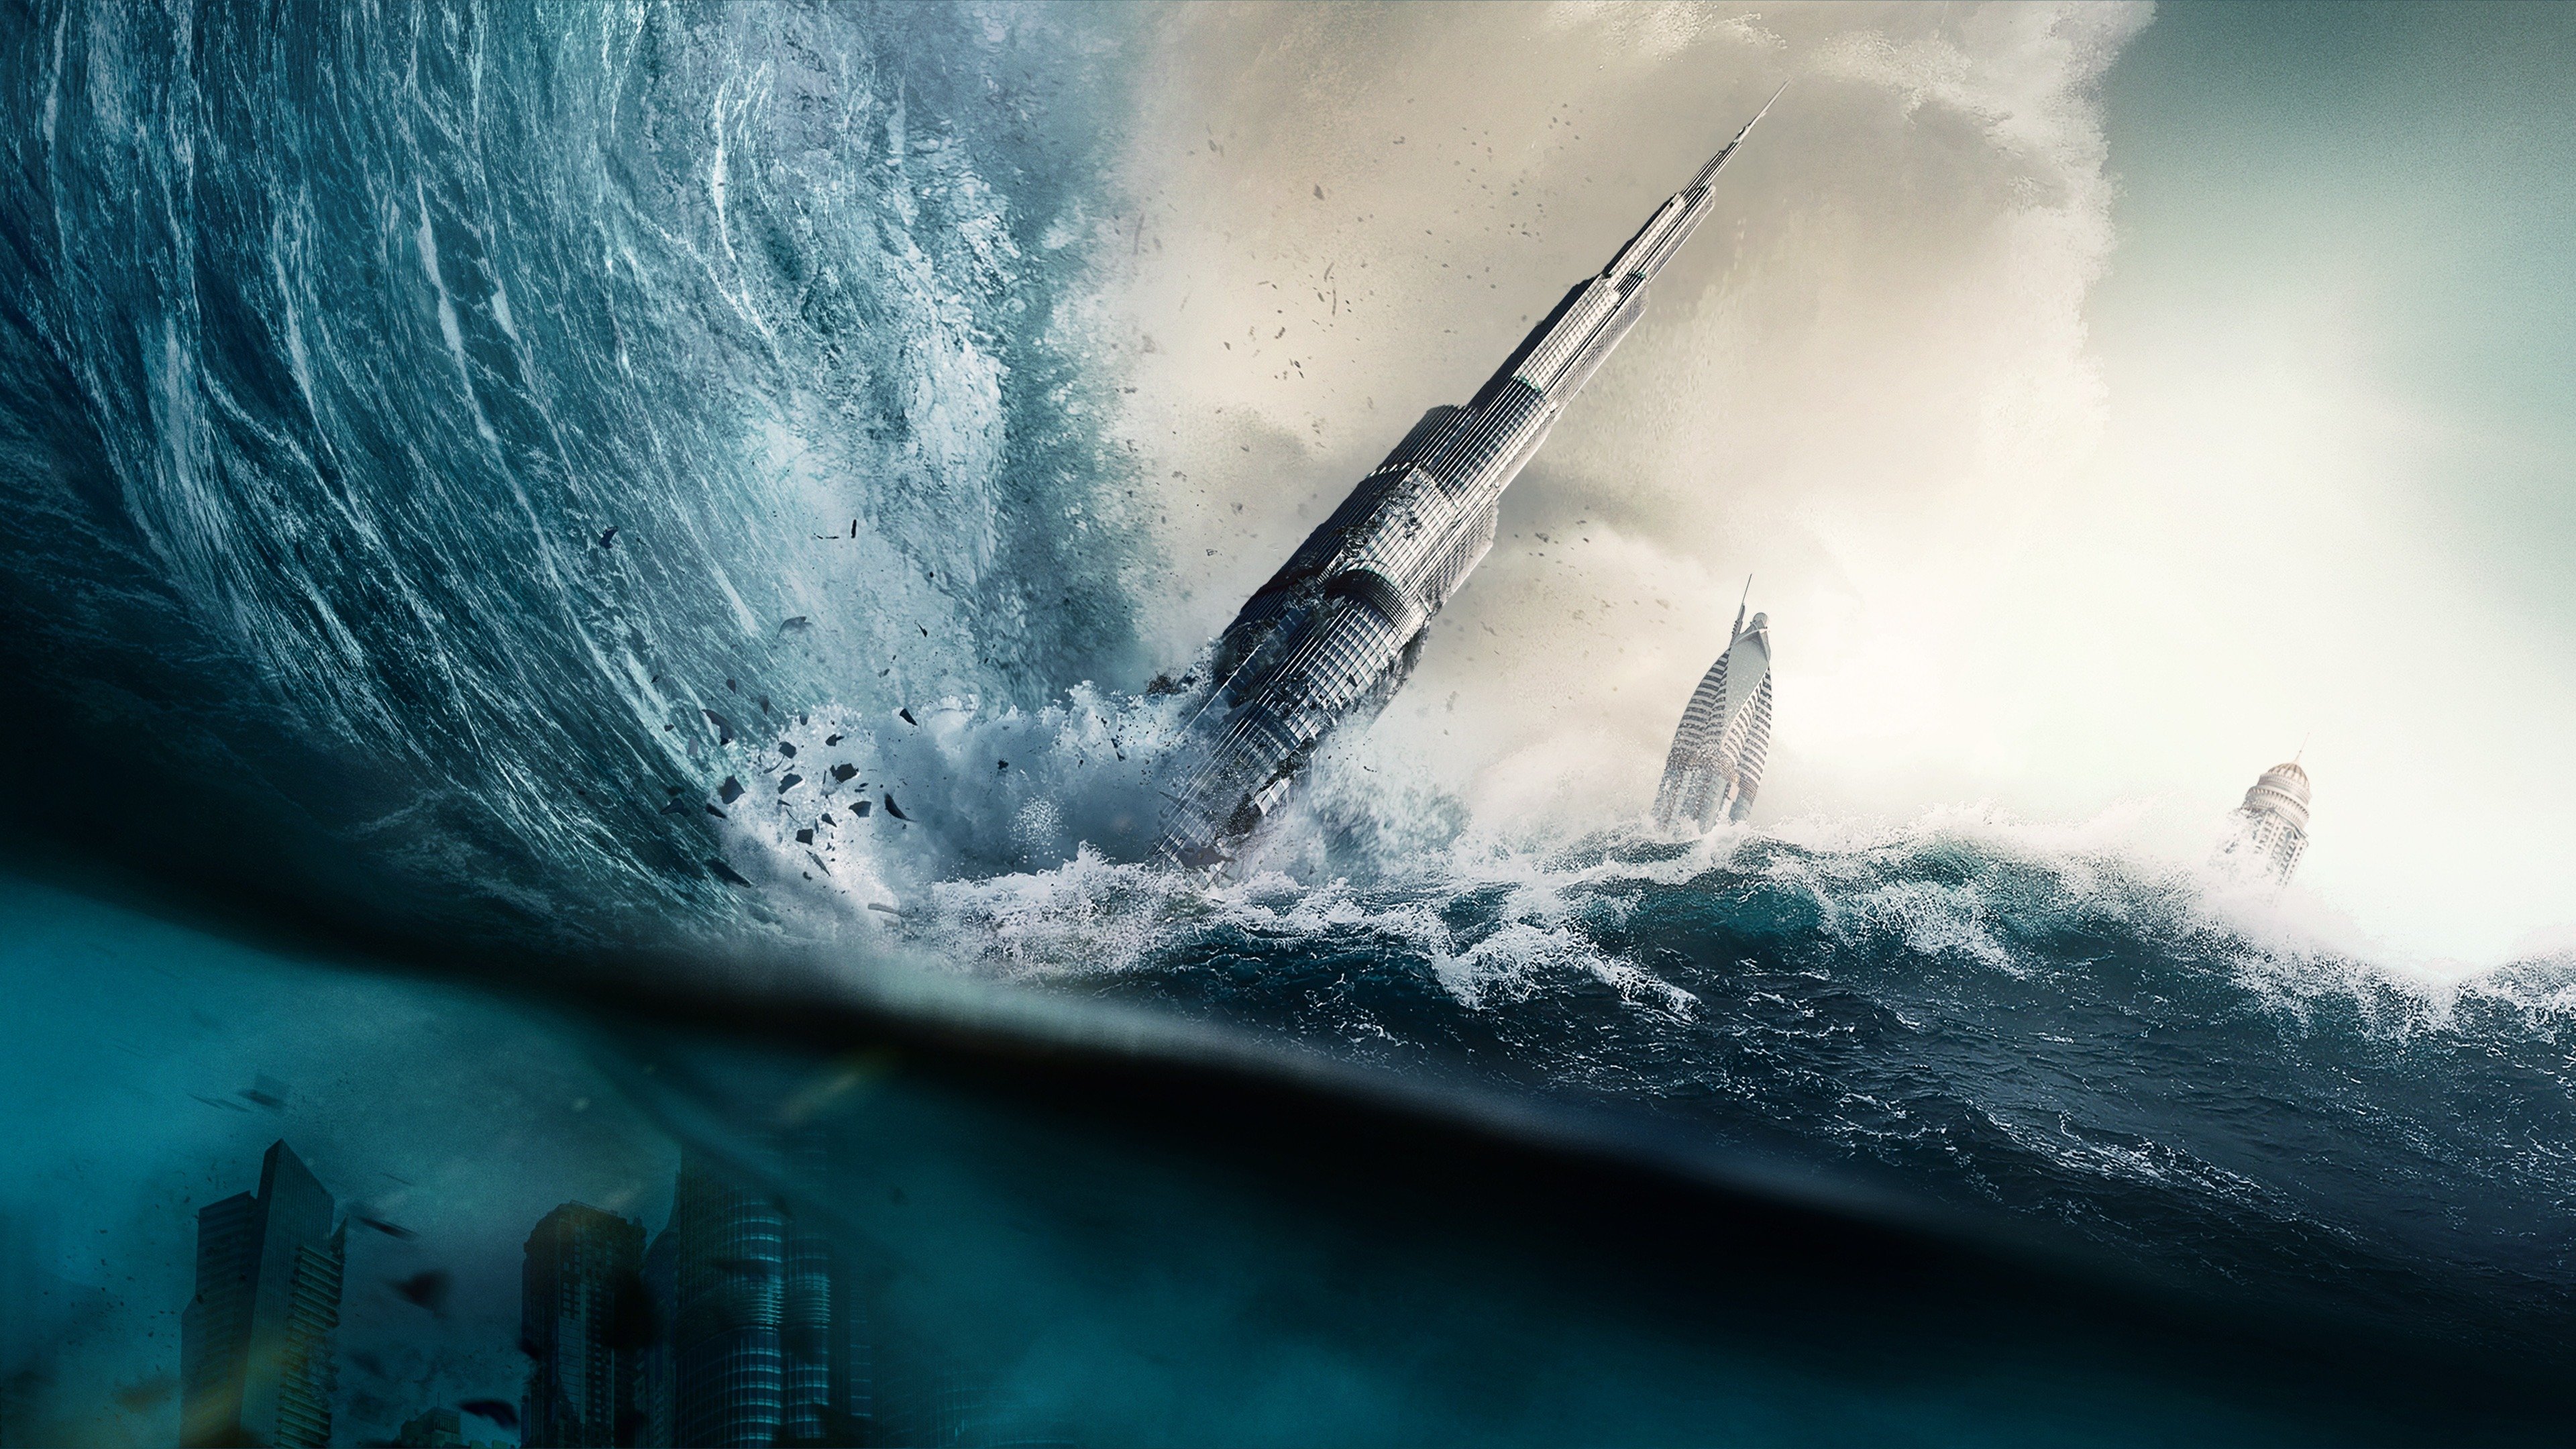 Geostorm 'Control' Trailer Trailers & Videos Rotten Tomatoes